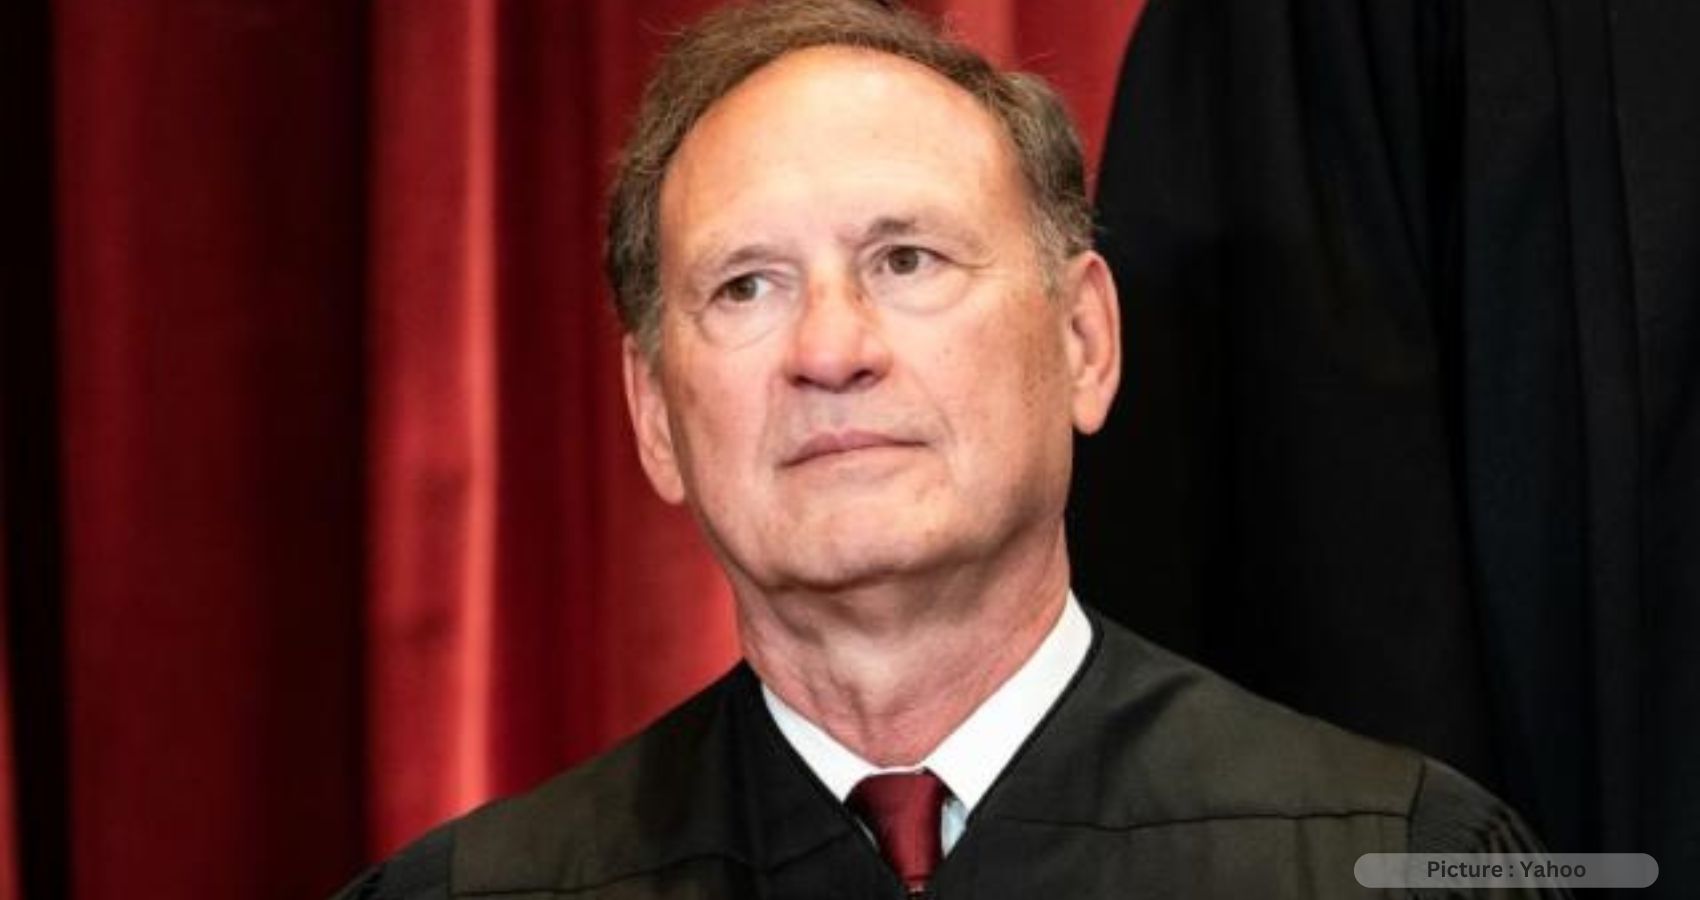 Justice Samuel Alito Says Congress Has ‘No Authority’ To Regulate Supreme Court